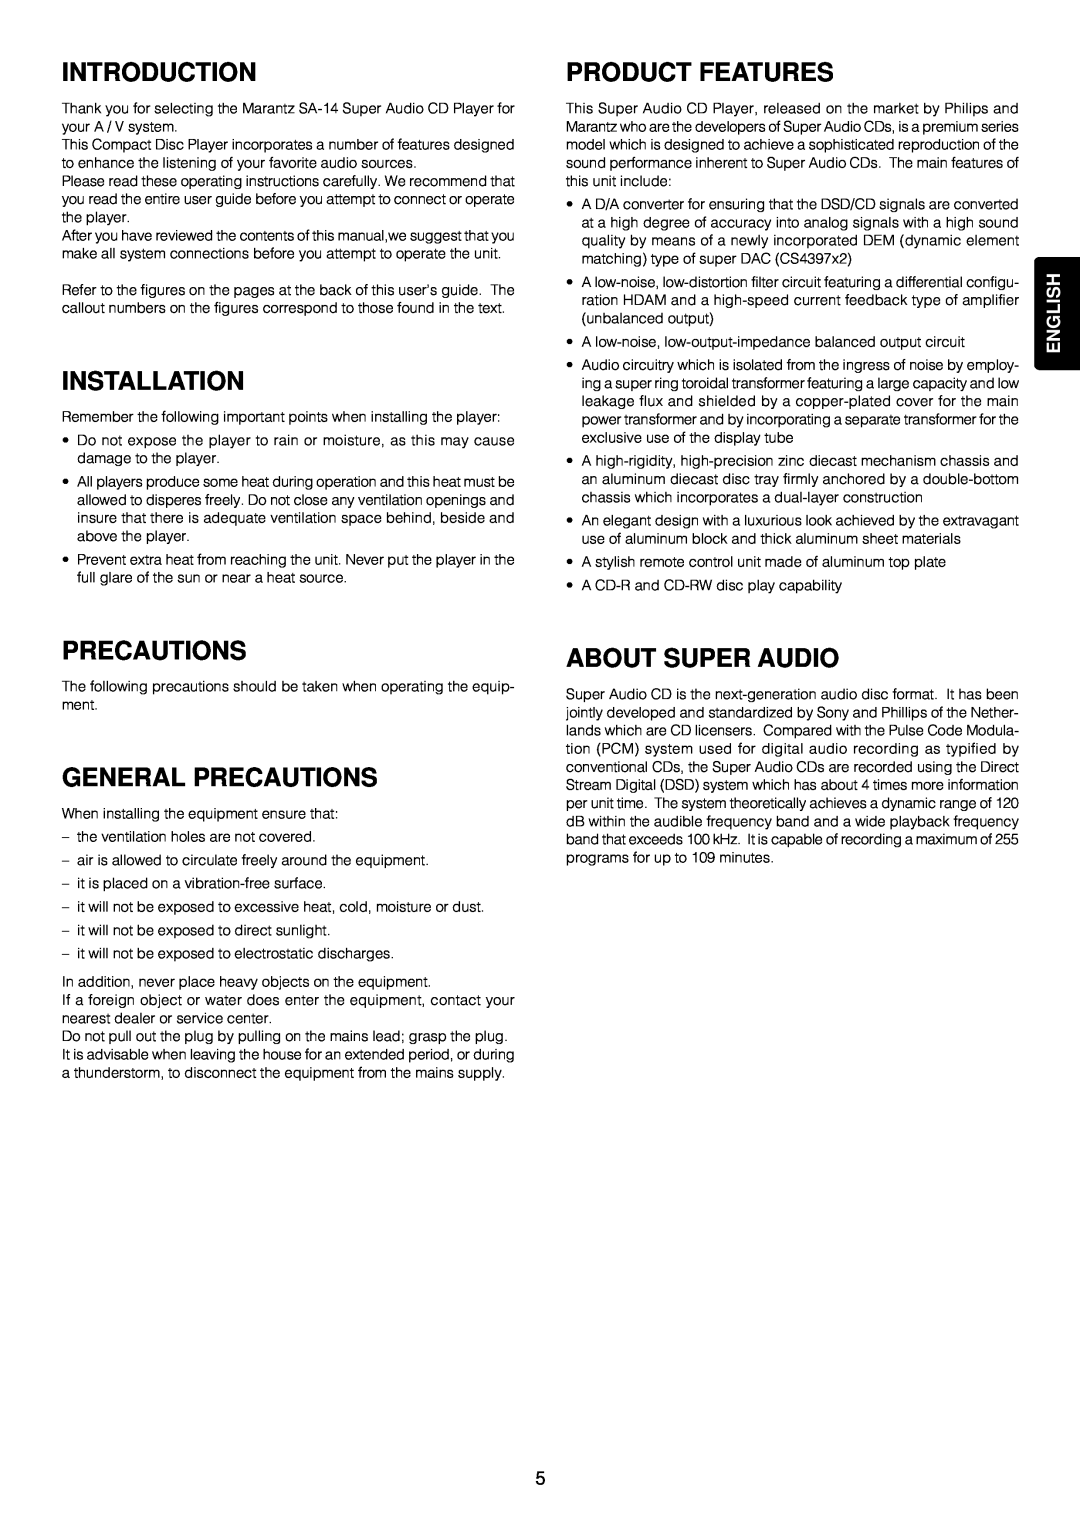 Marantz SA-14 manual Introduction, Installation, Product Features, General Precautions, About Super Audio, English 